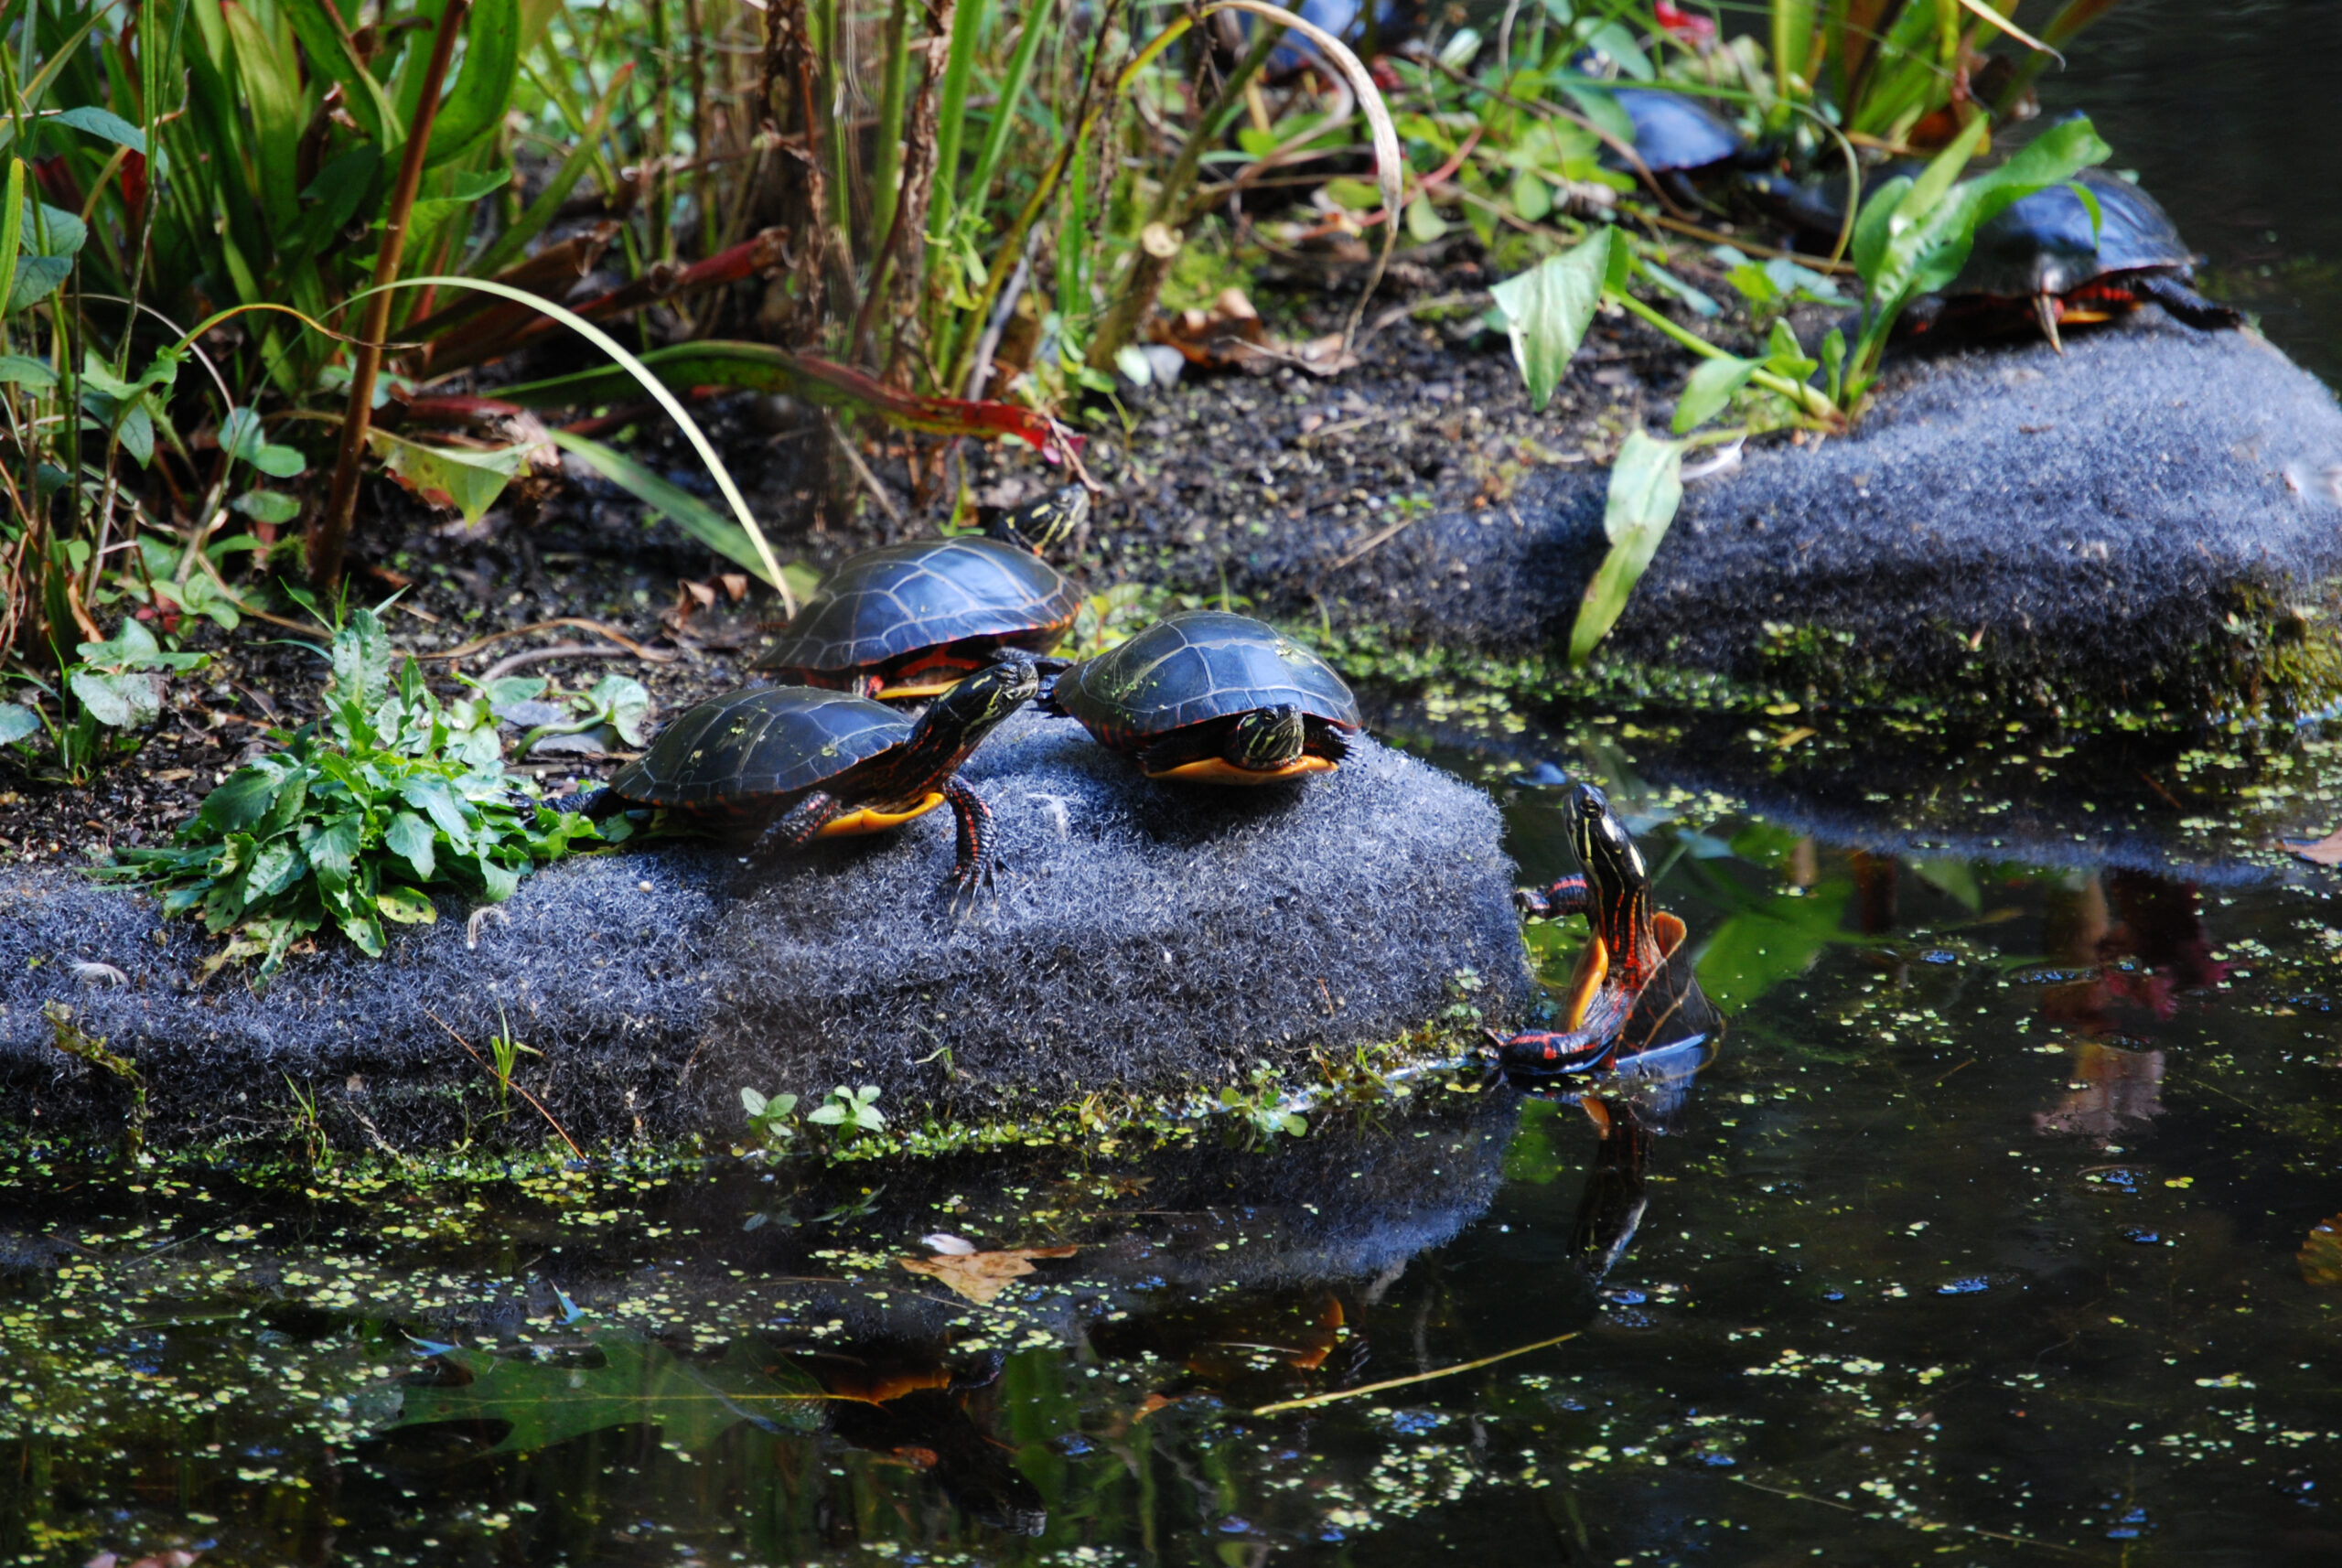 Turtles on floating islands in Lily Pond, Garden in the Woods, (c) New England Wild Flower Society, S.Ziglar